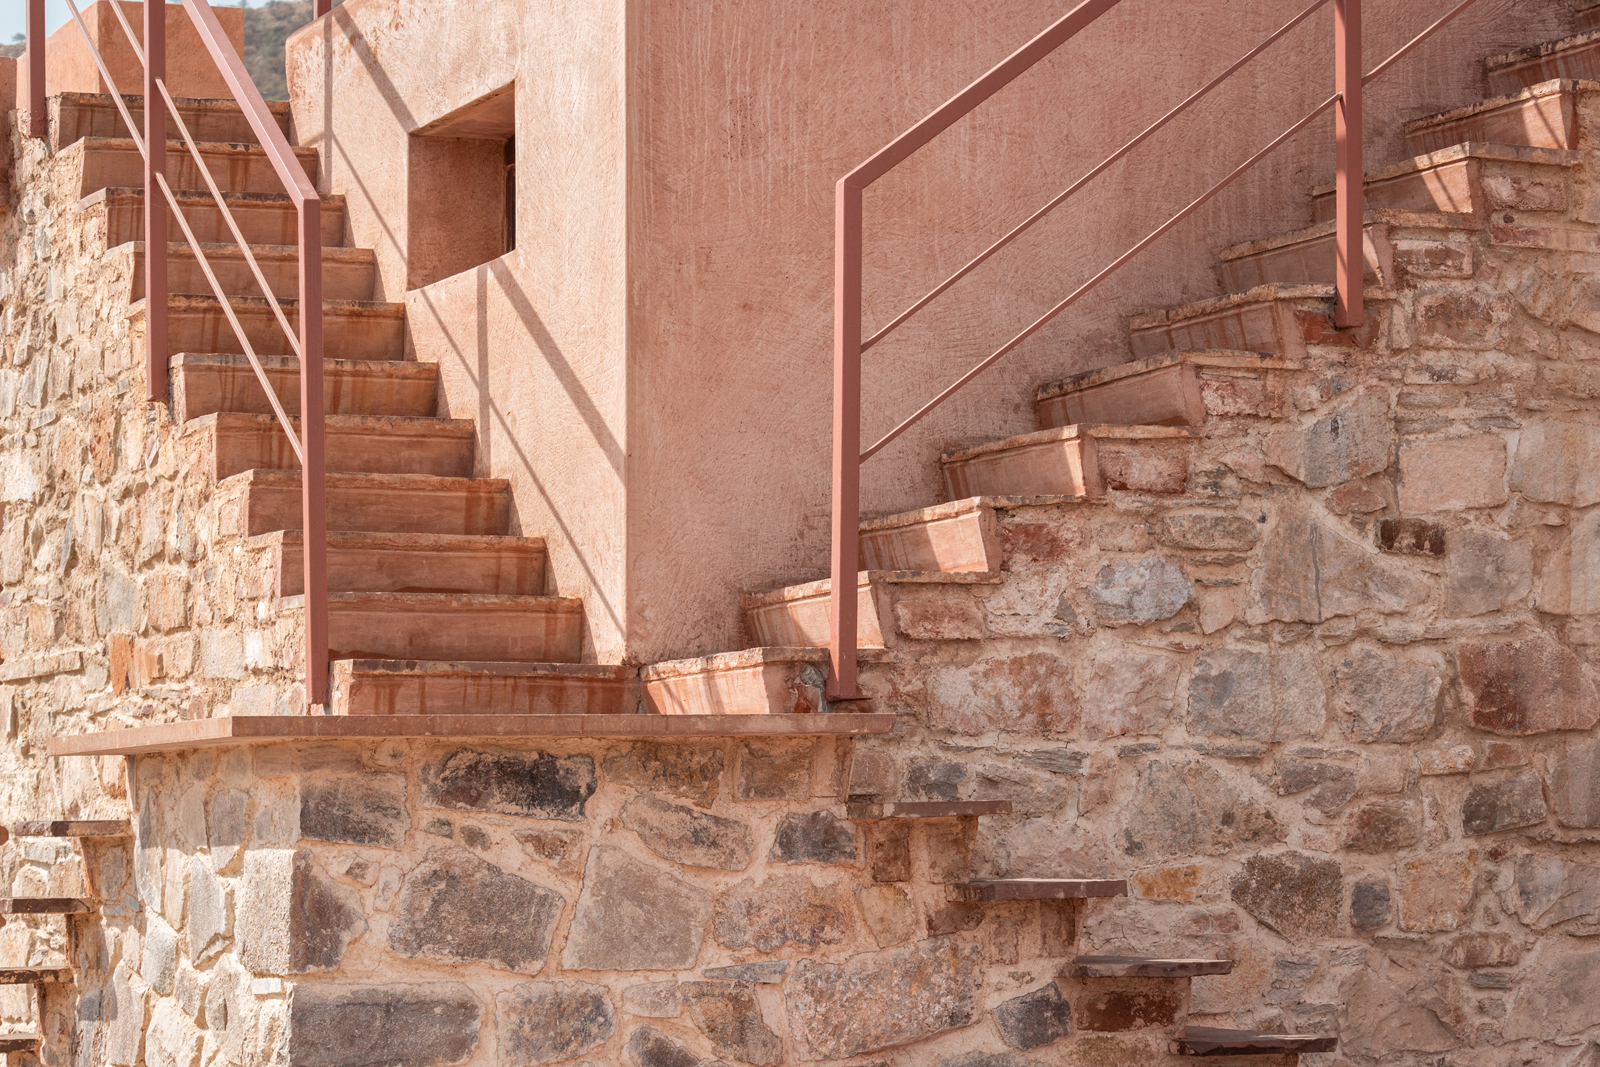 The outer staircase of this house is made of reclaimed stone